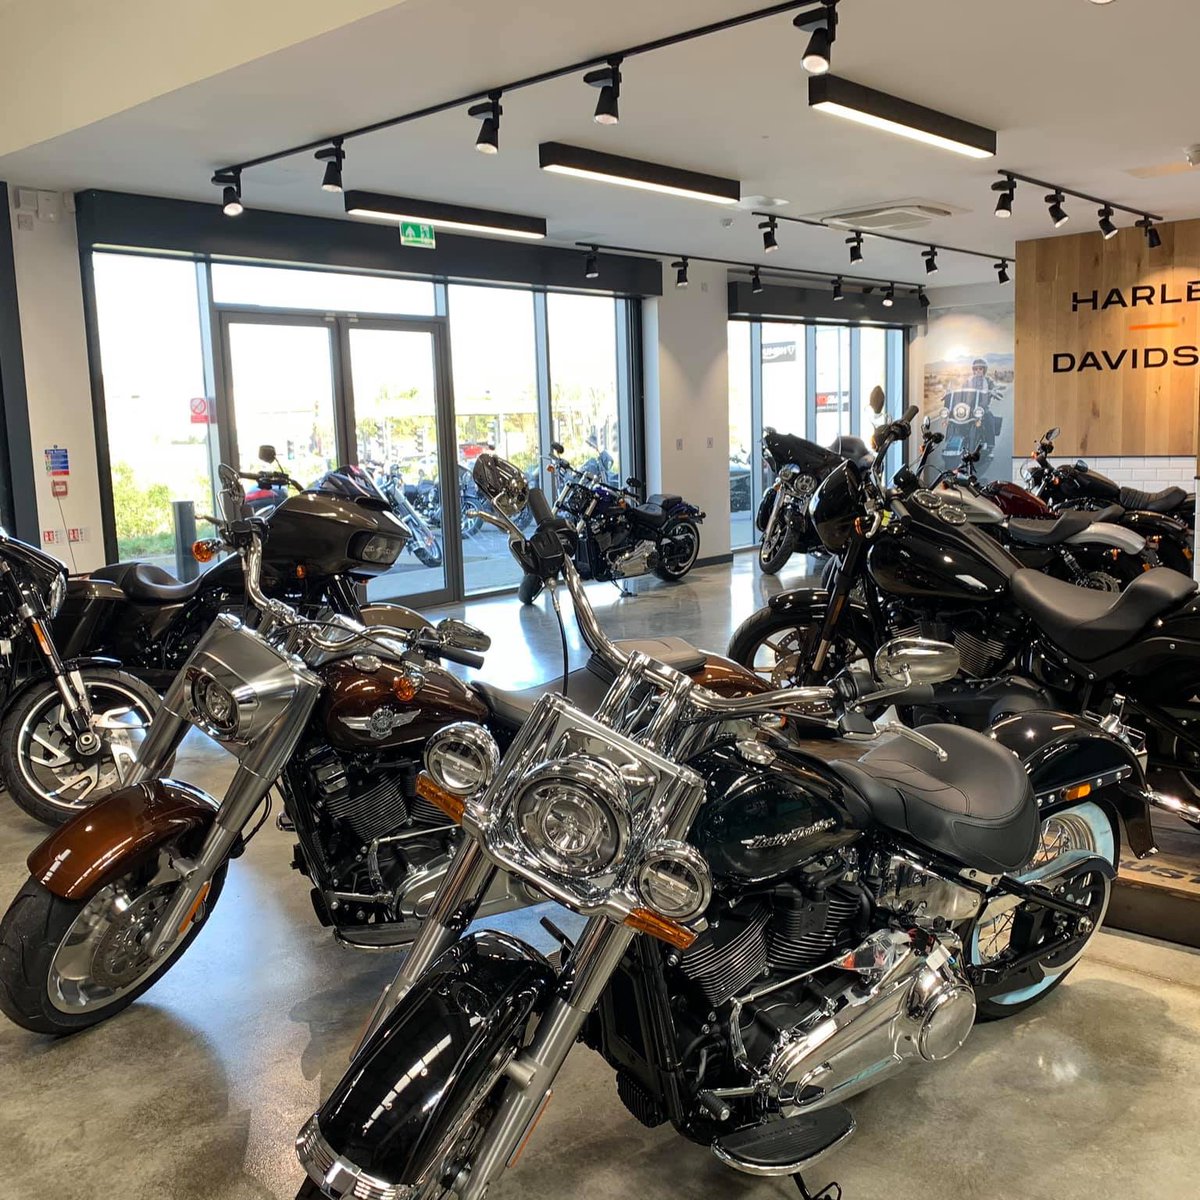 Motorcycle Detailer/Valeter opportunity with LIND Motor Group at their top @UKTriumph & @Harley_UKI motorcycle business in Watford. @JCPBedsAndHerts #harleydavidson #triumph #motorcycles #motorcyclejobs #bikejobs #jobsearch #vacancy More Info & Apply 👉bikejobs.co.uk